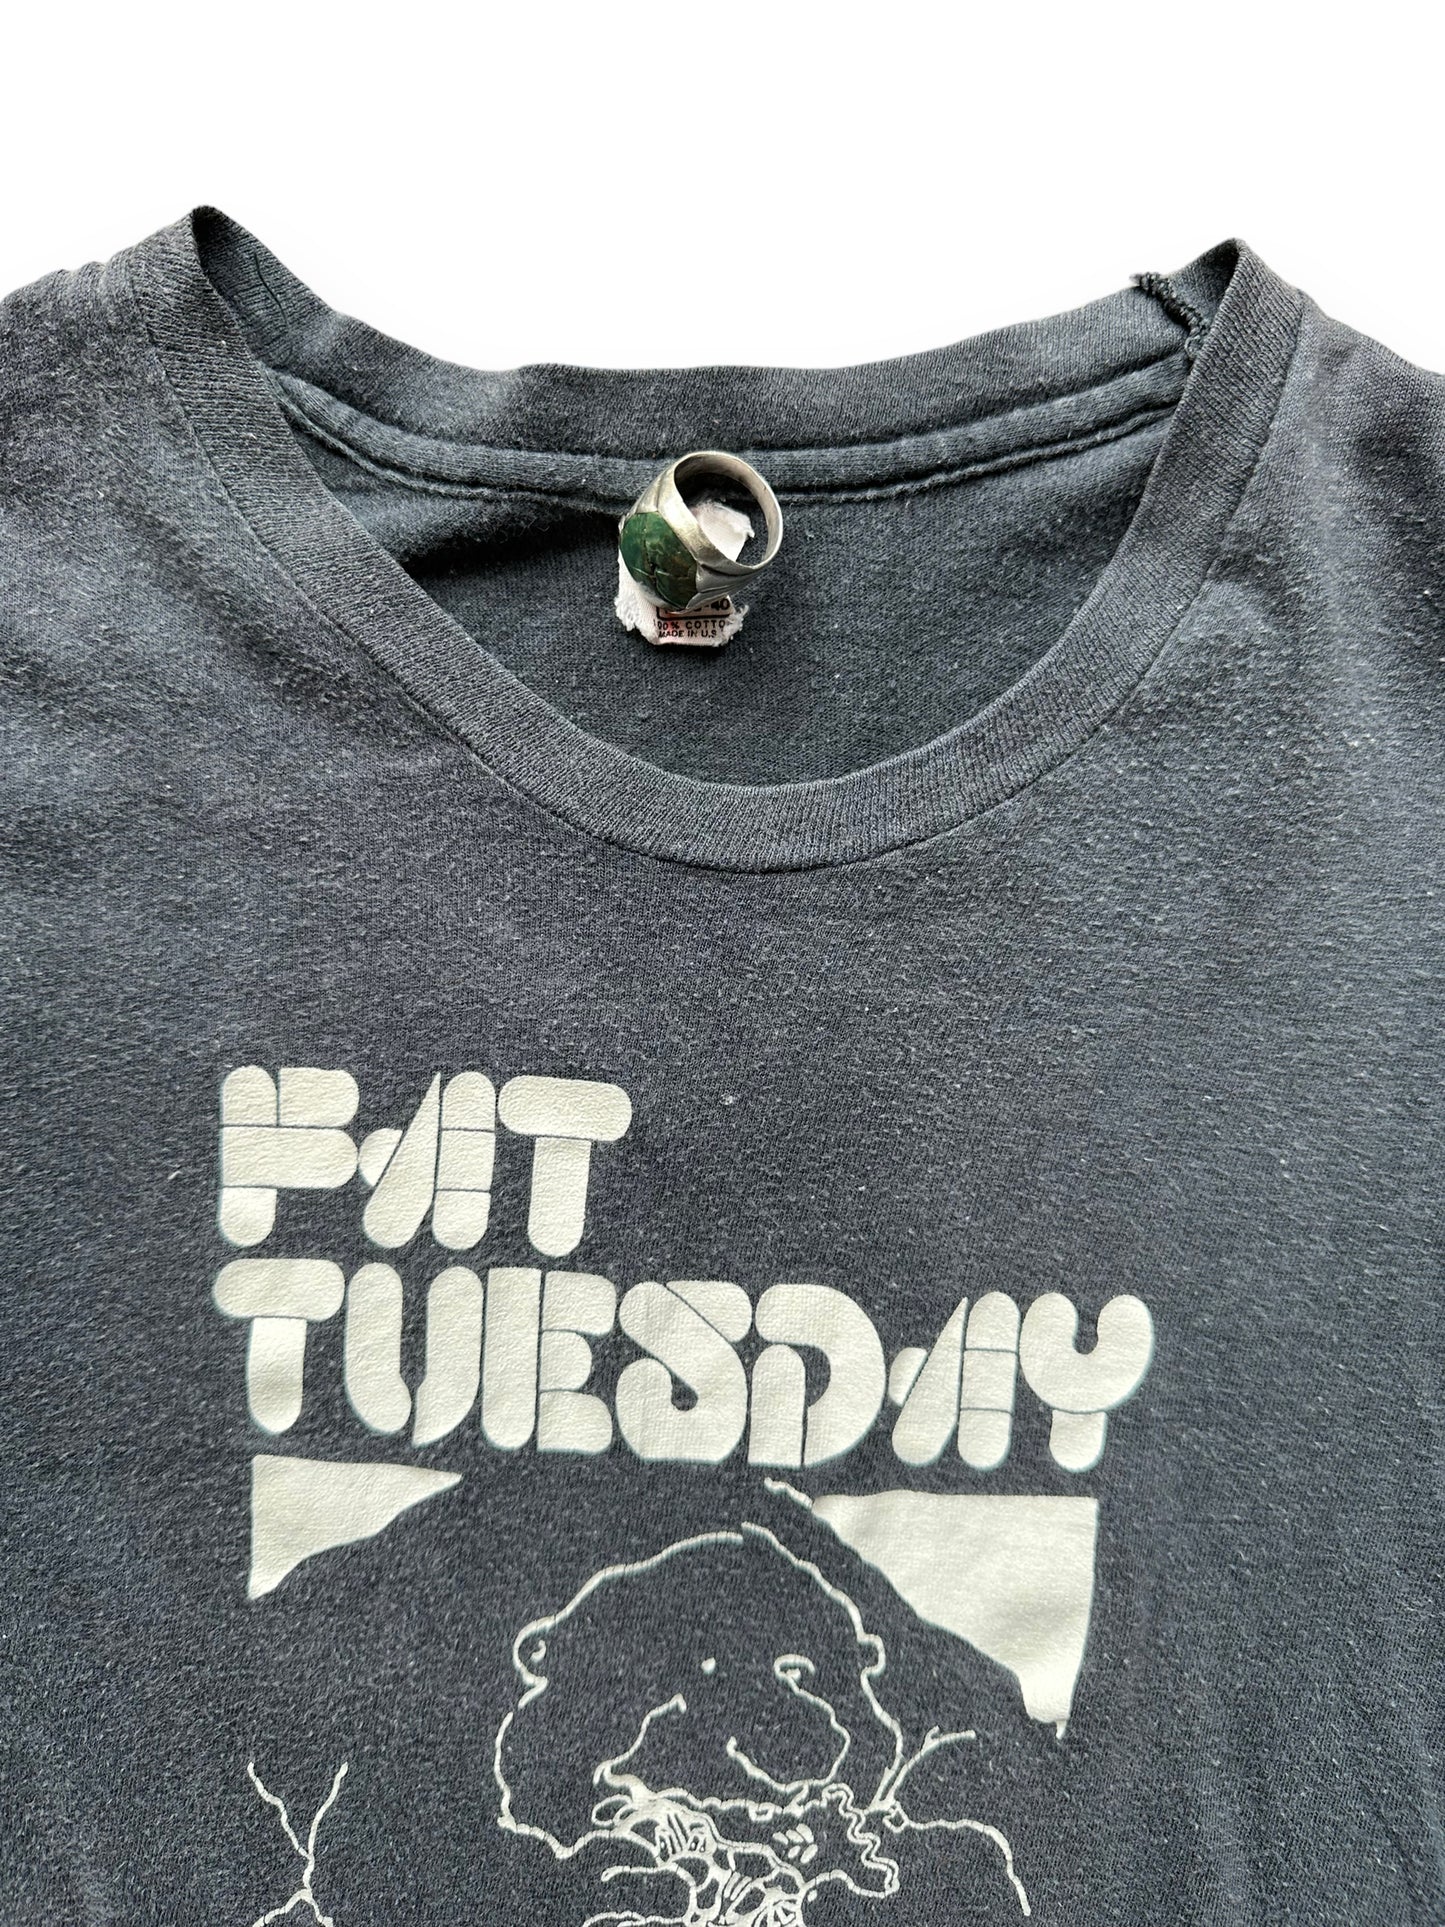 Tag View of Vintage Fat Tuesday Seattle Tee SZ M | Vintage Single Stitch T-Shirts Seattle | Barn Owl Vintage Tees Seattle